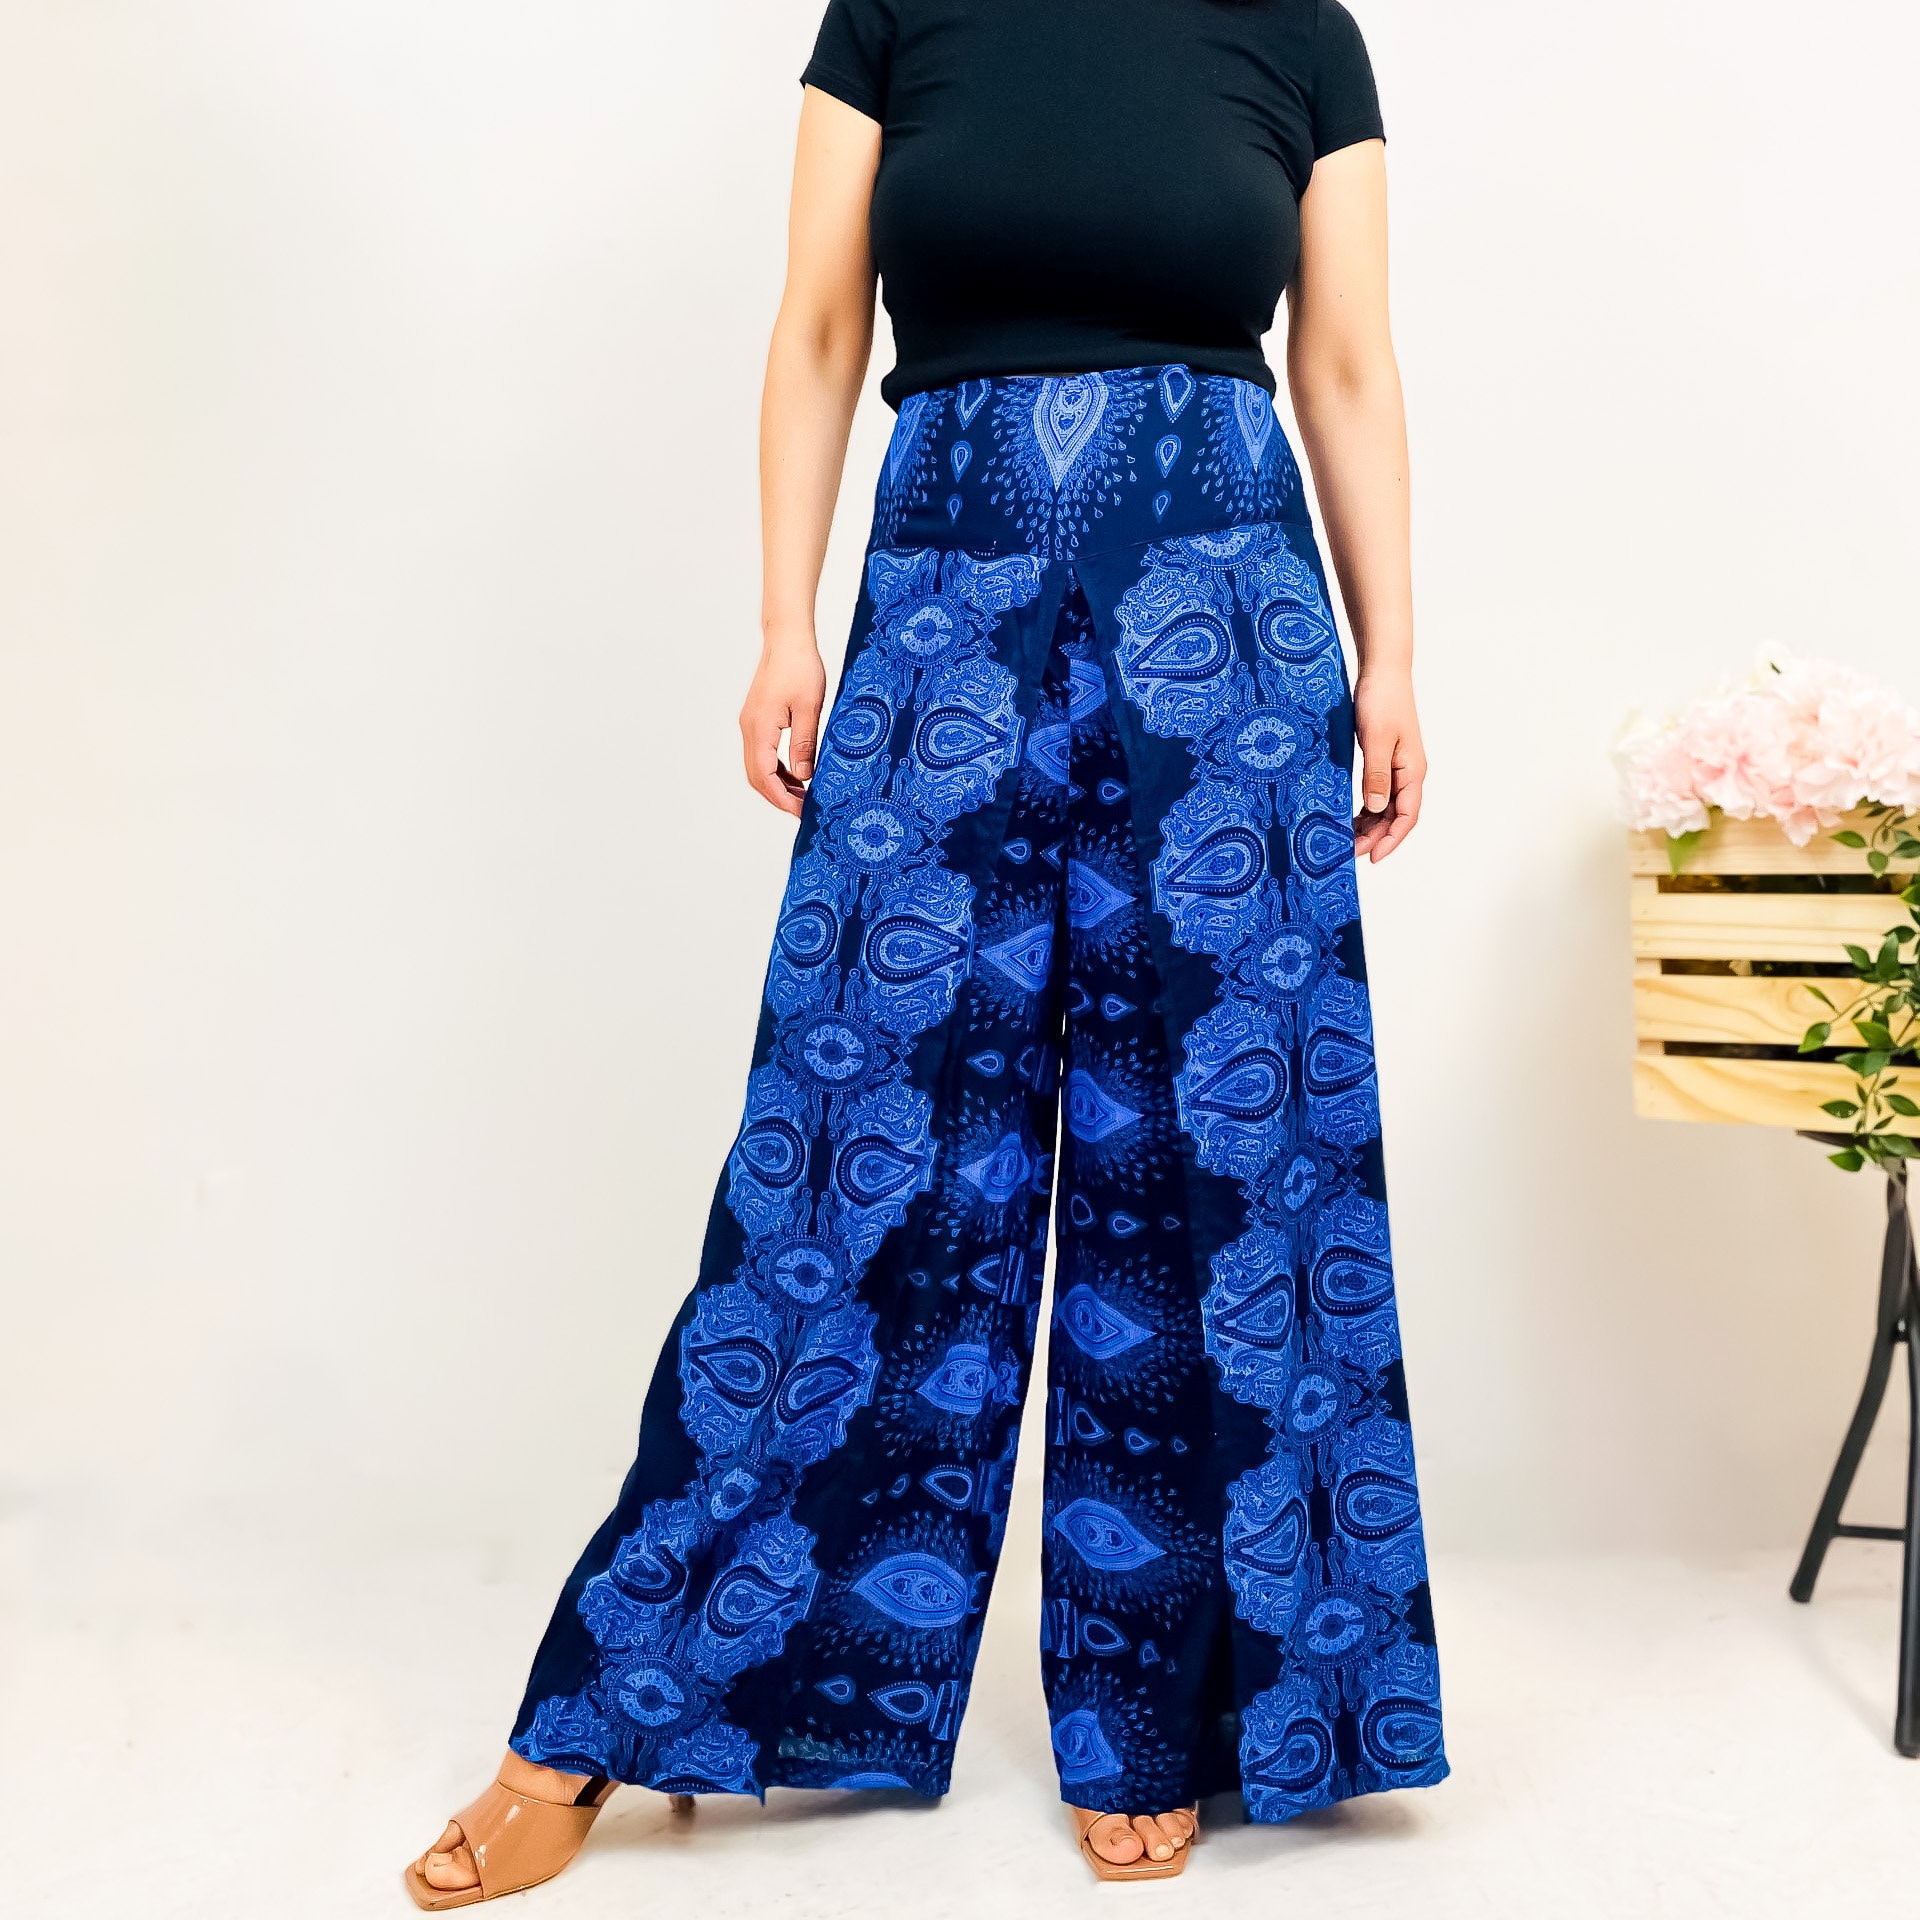 BLUE HIGH WAISTED Palazzo Pants Petite Small to Plus Sizes Wide